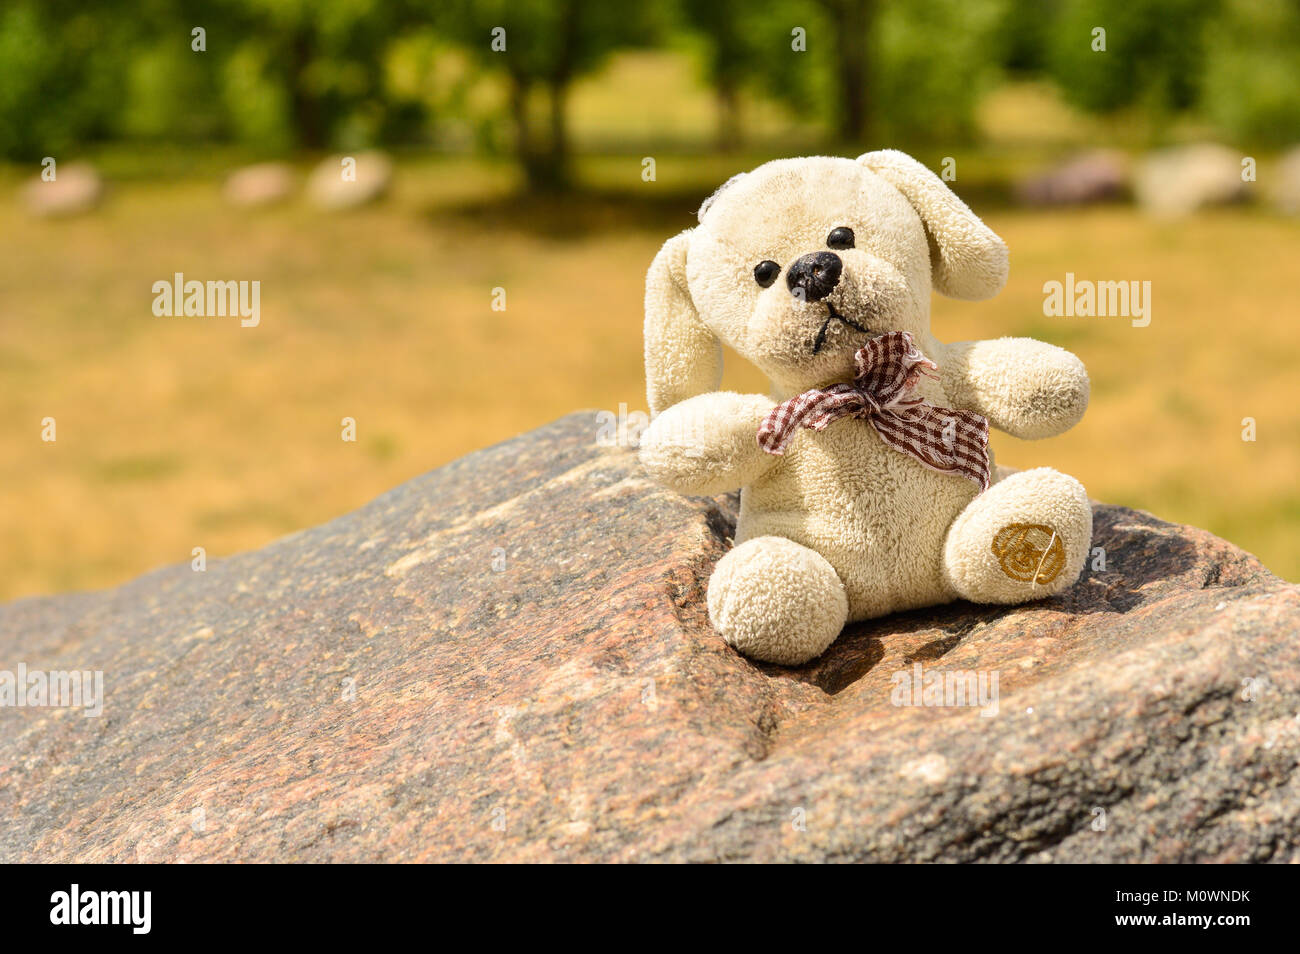 A dirty plush toy sitting on a stone Stock Photo